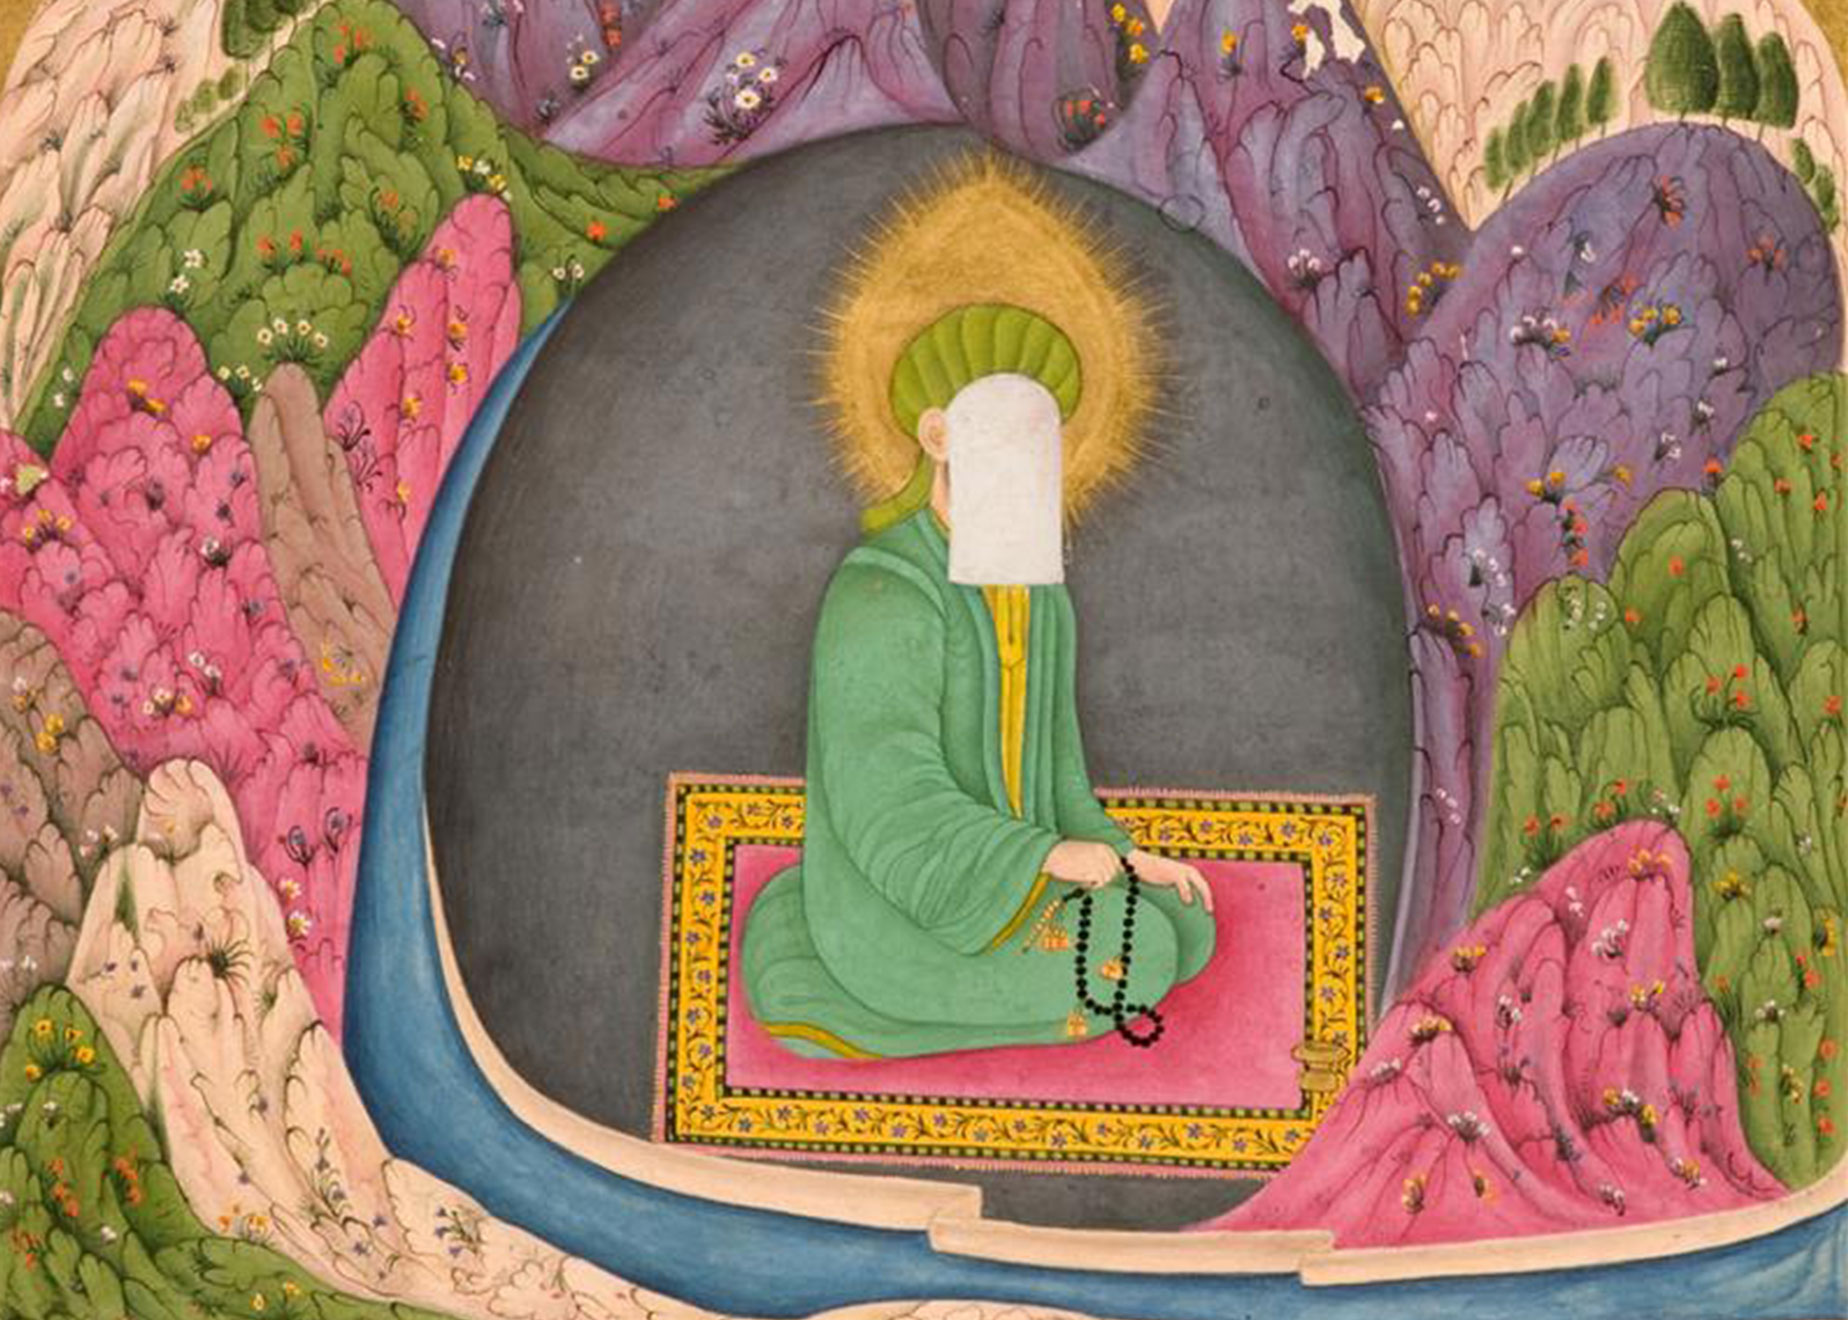 An Academic Is Fired Over a Medieval Painting of the Prophet Muhammad